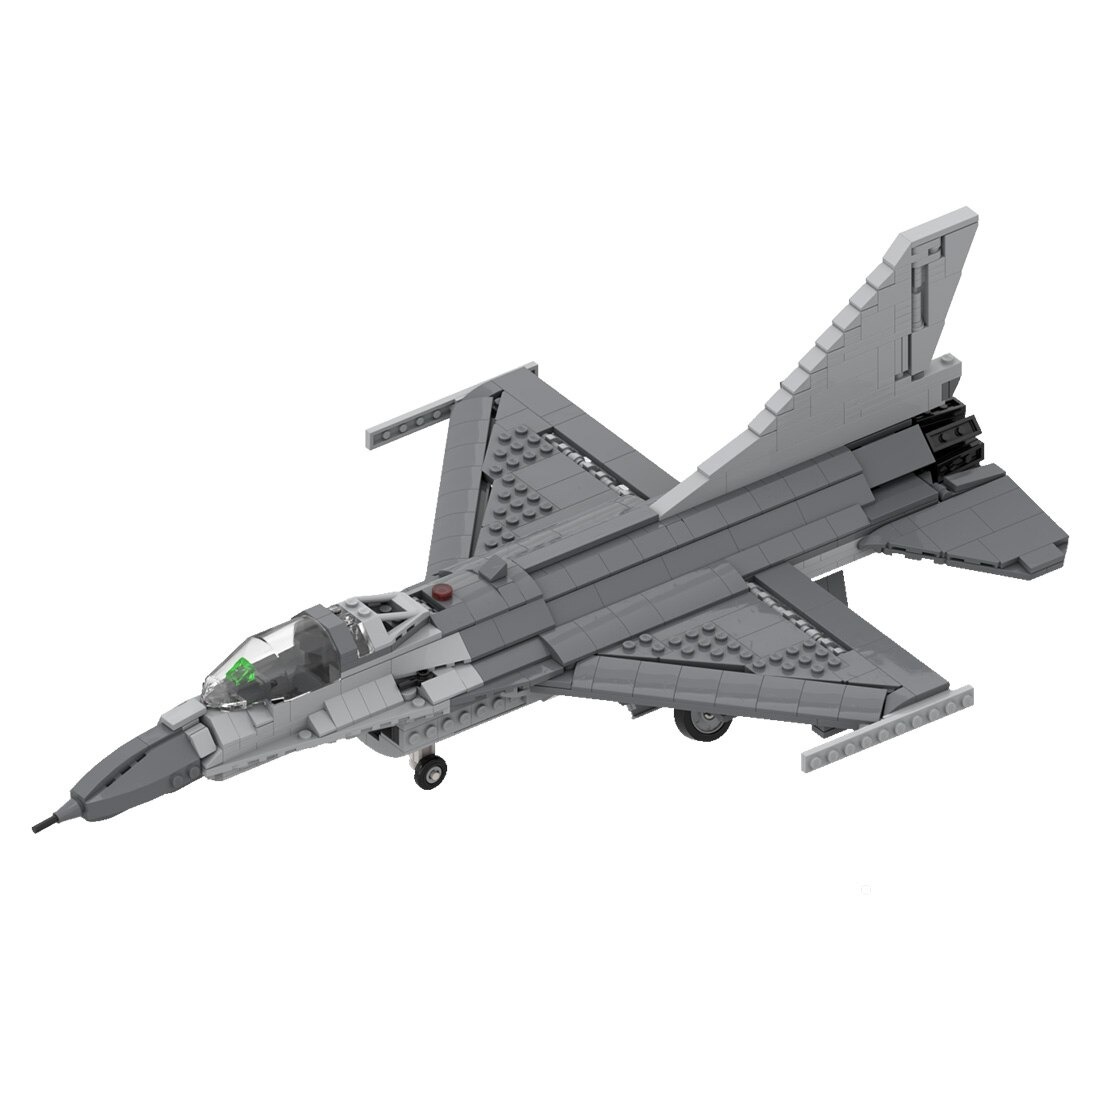 authorized moc 45041 f 16 fighting falco main 0 - MOULD KING